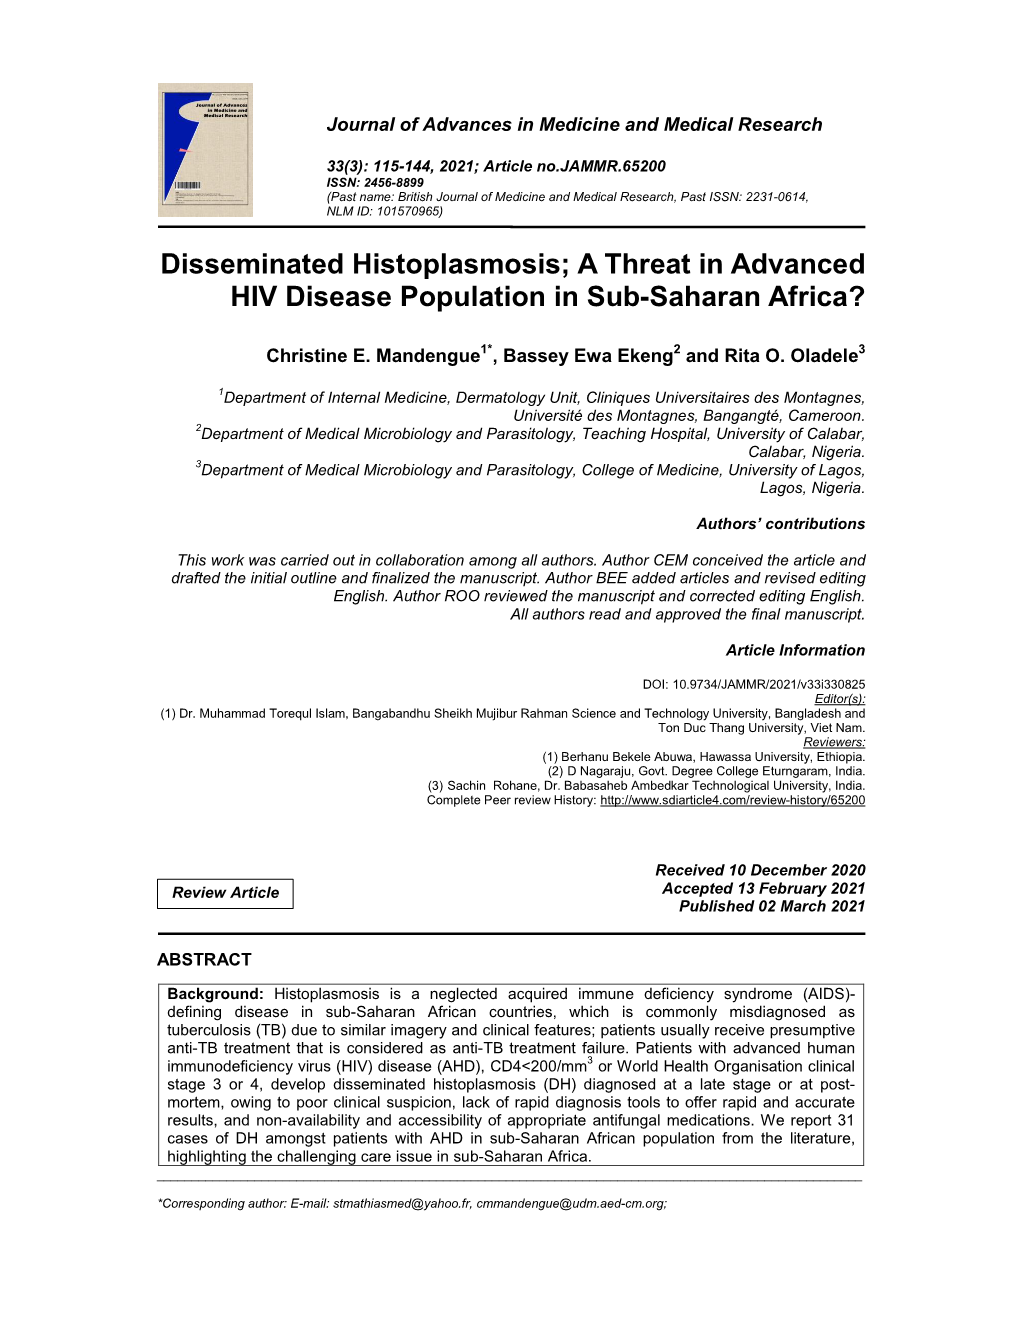 Disseminated Histoplasmosis; a Threat in Advanced HIV Disease Population in Sub-Saharan Africa?